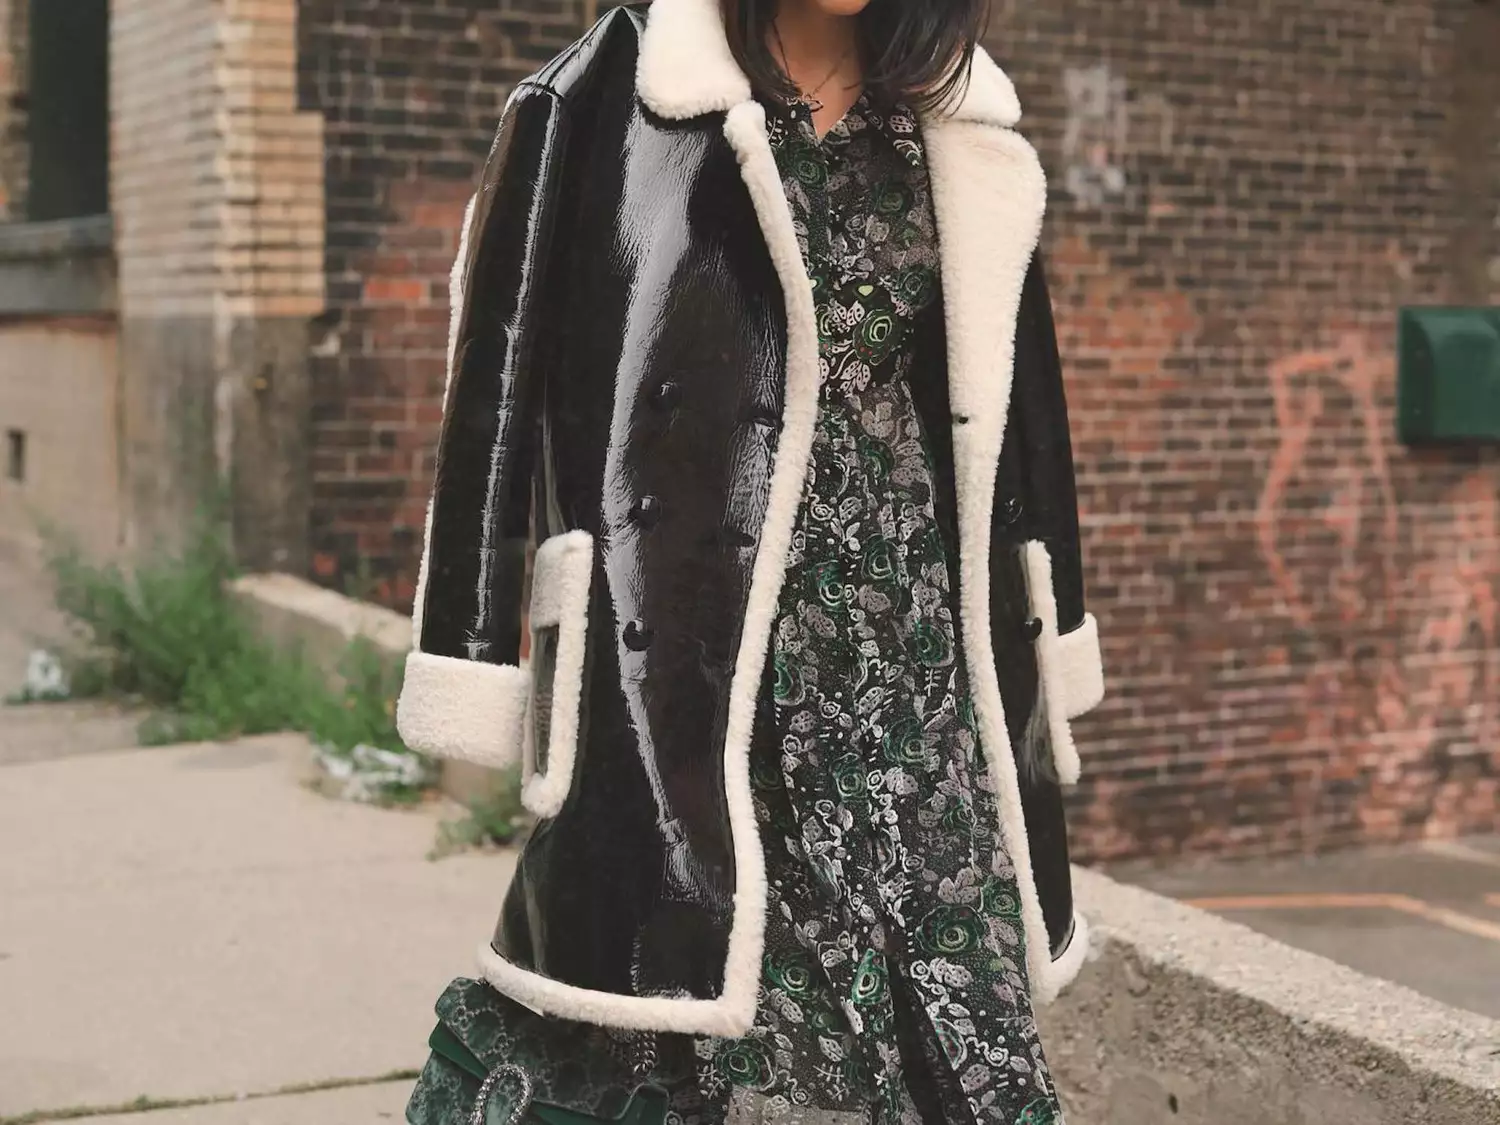 Byrdie writer Samantha Crompton wears a shearling-lined pleather coat over a patterned midi dress